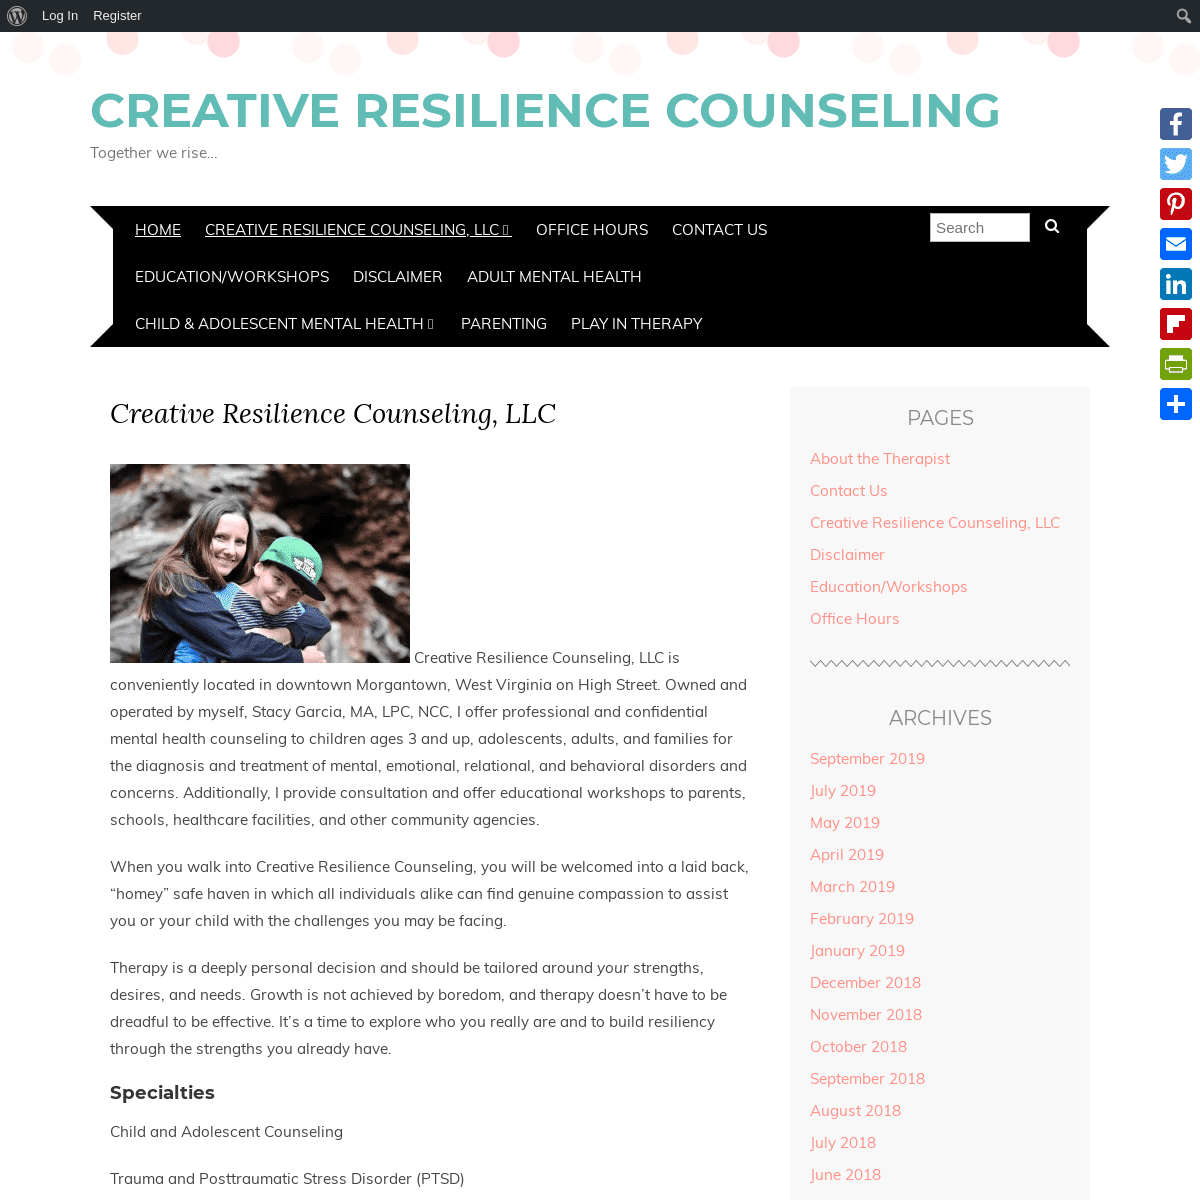 A complete backup of creativeresiliencecounseling.com